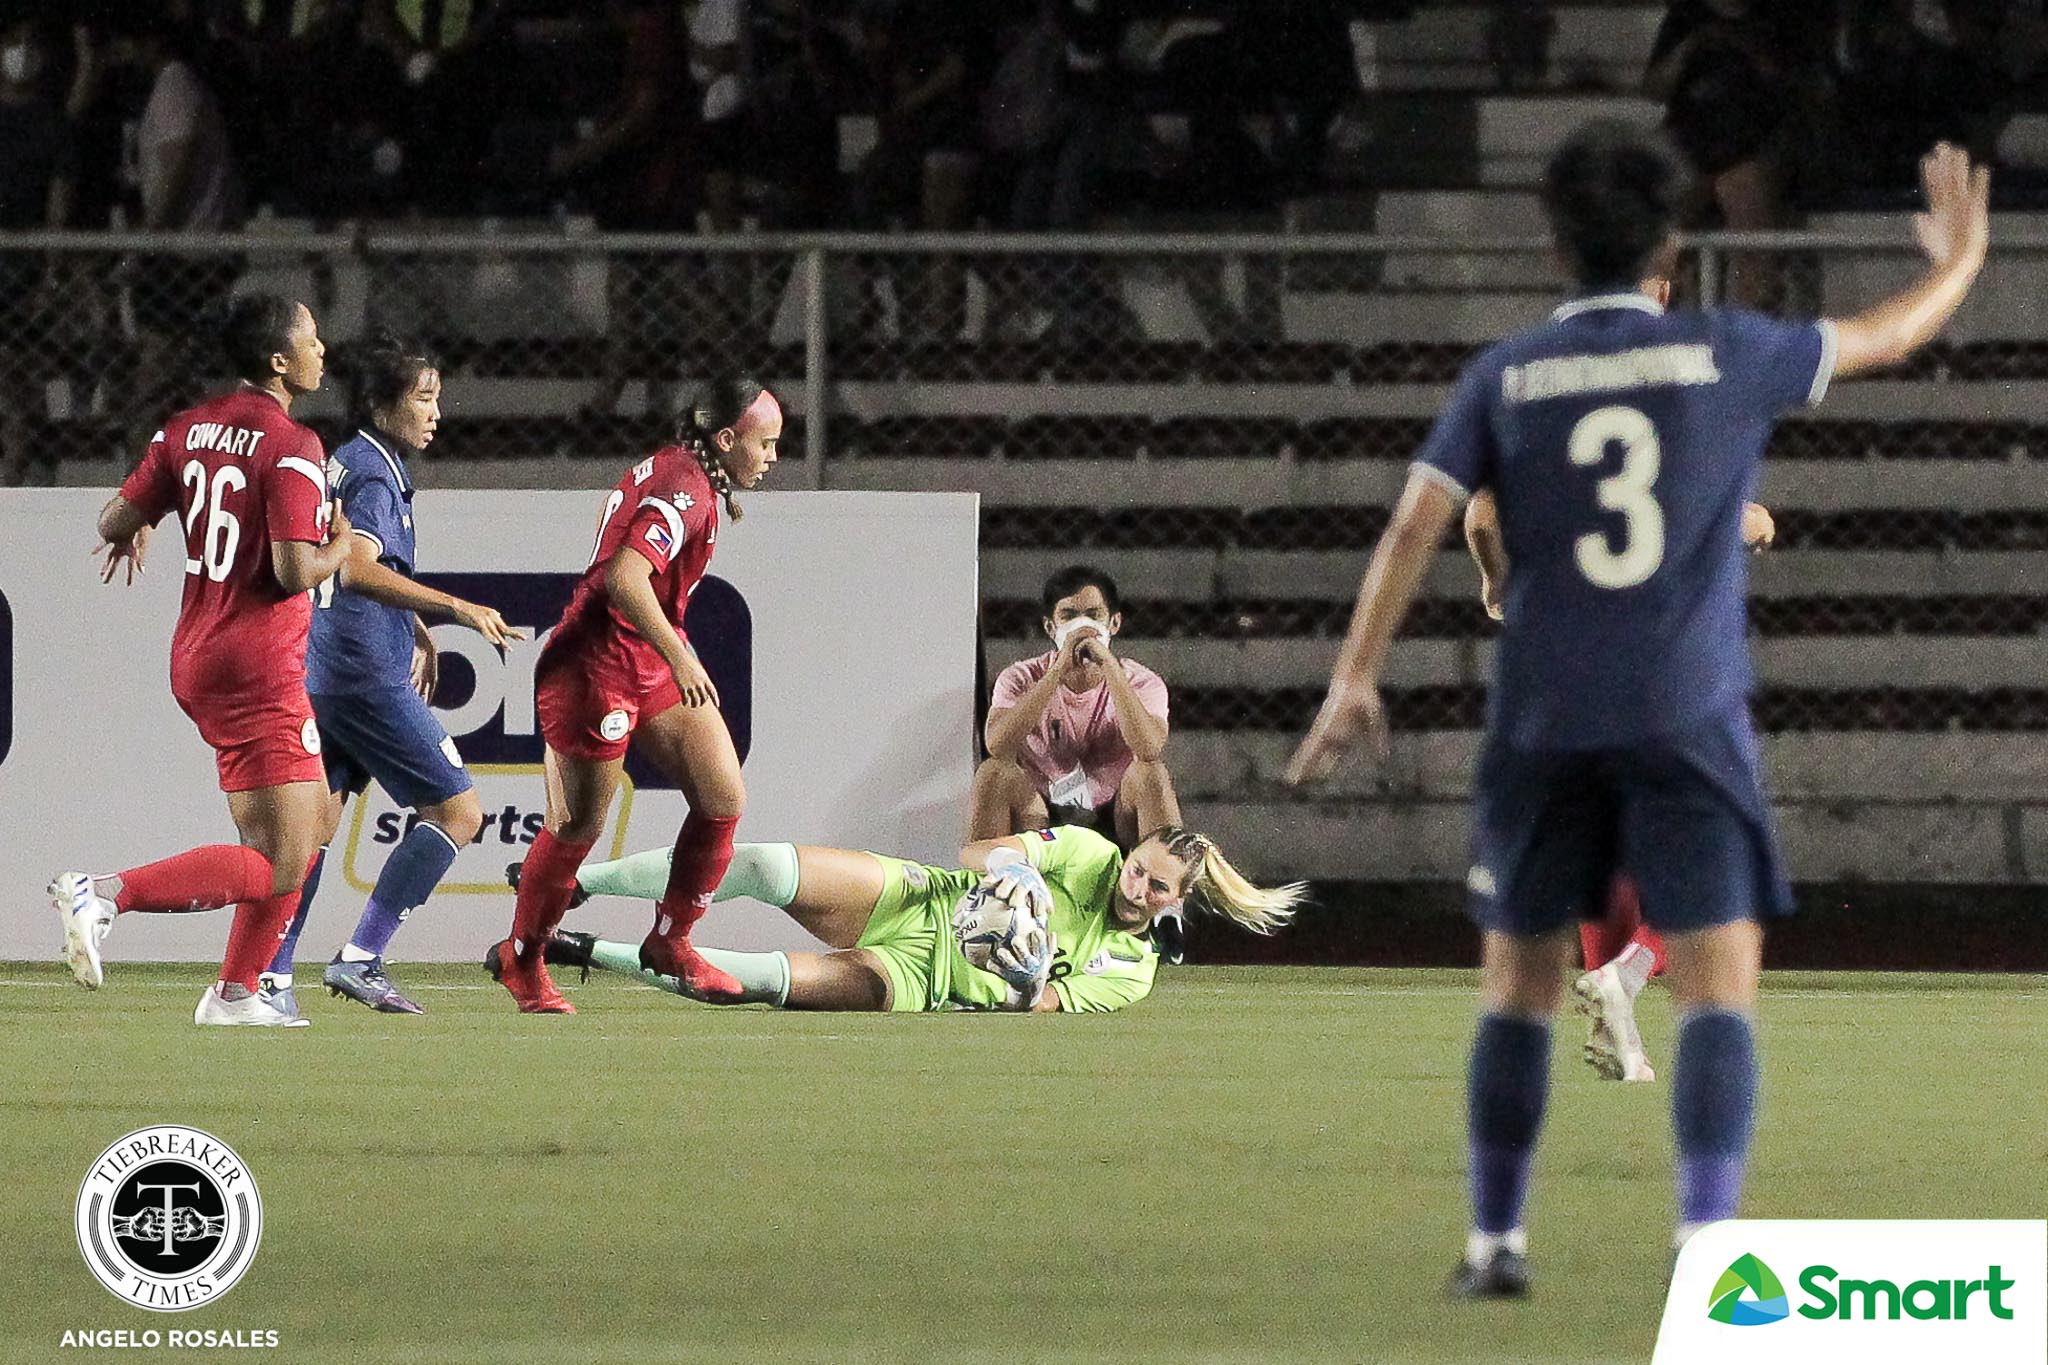 2022-AFF-Womens-Championship-Philippines-vs-Thailand-Finals-Oliva-McDaniel-PHI Thailand loss in group stage sparked championship run, says Olivia McDaniel 2022 AFF Women’s Championship Filipinas Football News  - philippine sports news